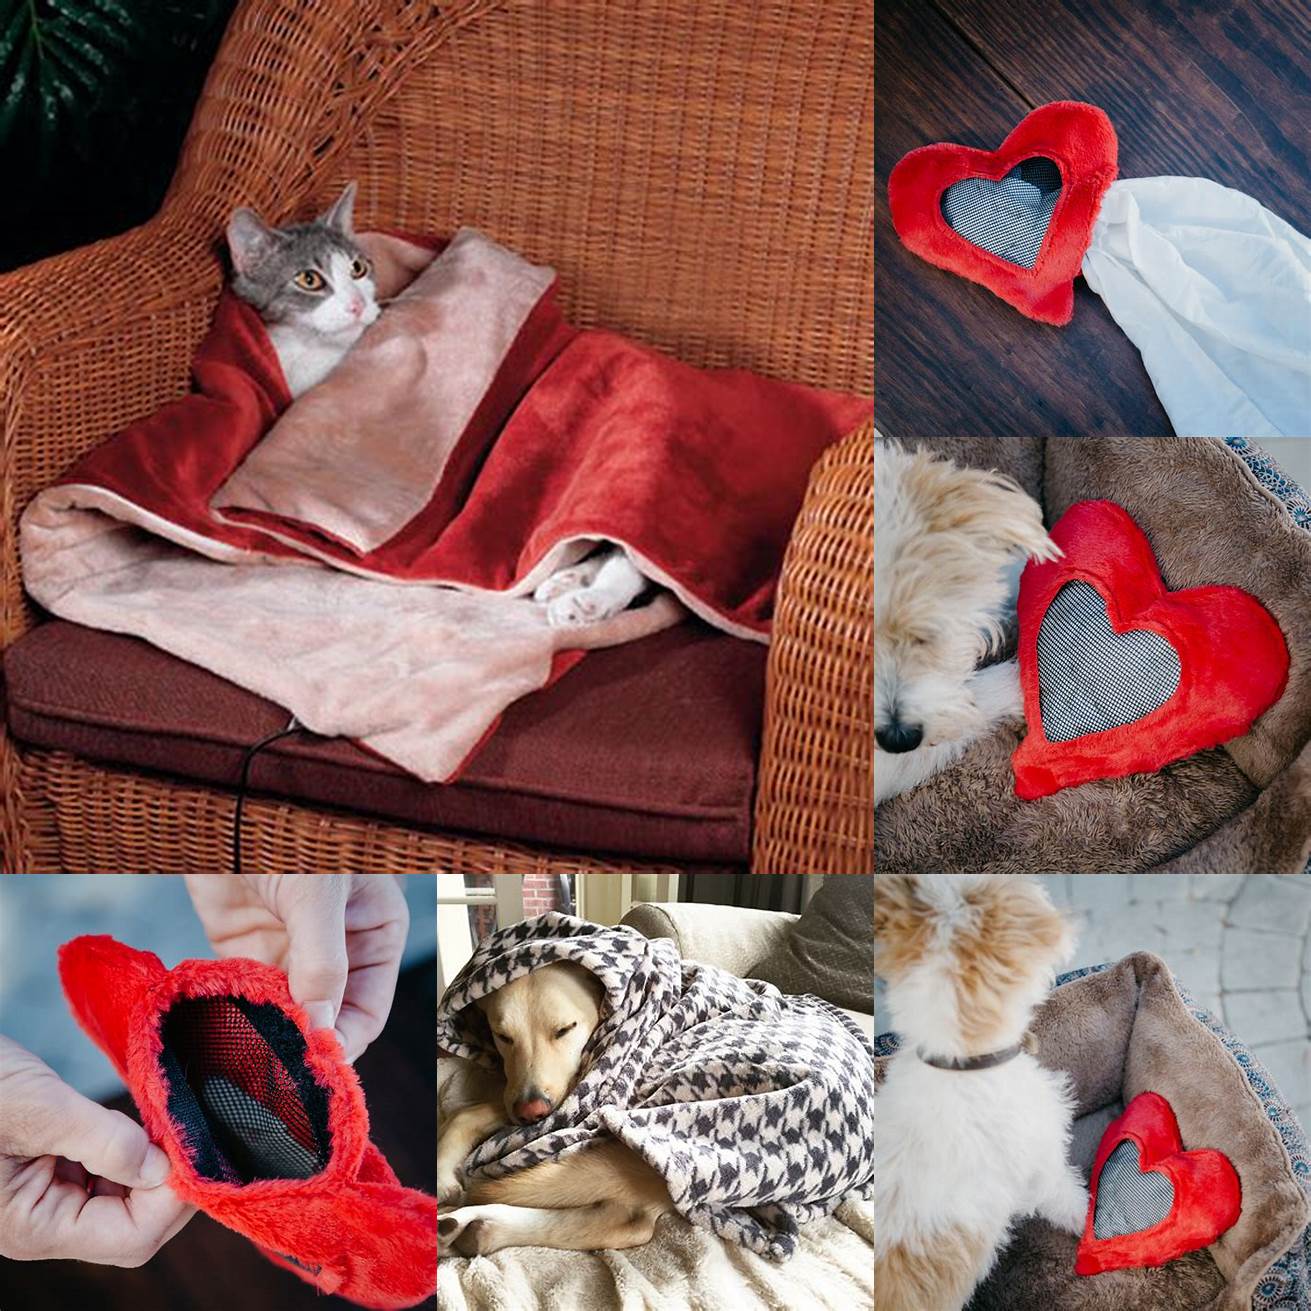 Leave a piece of clothing or blanket with your scent to comfort your cat